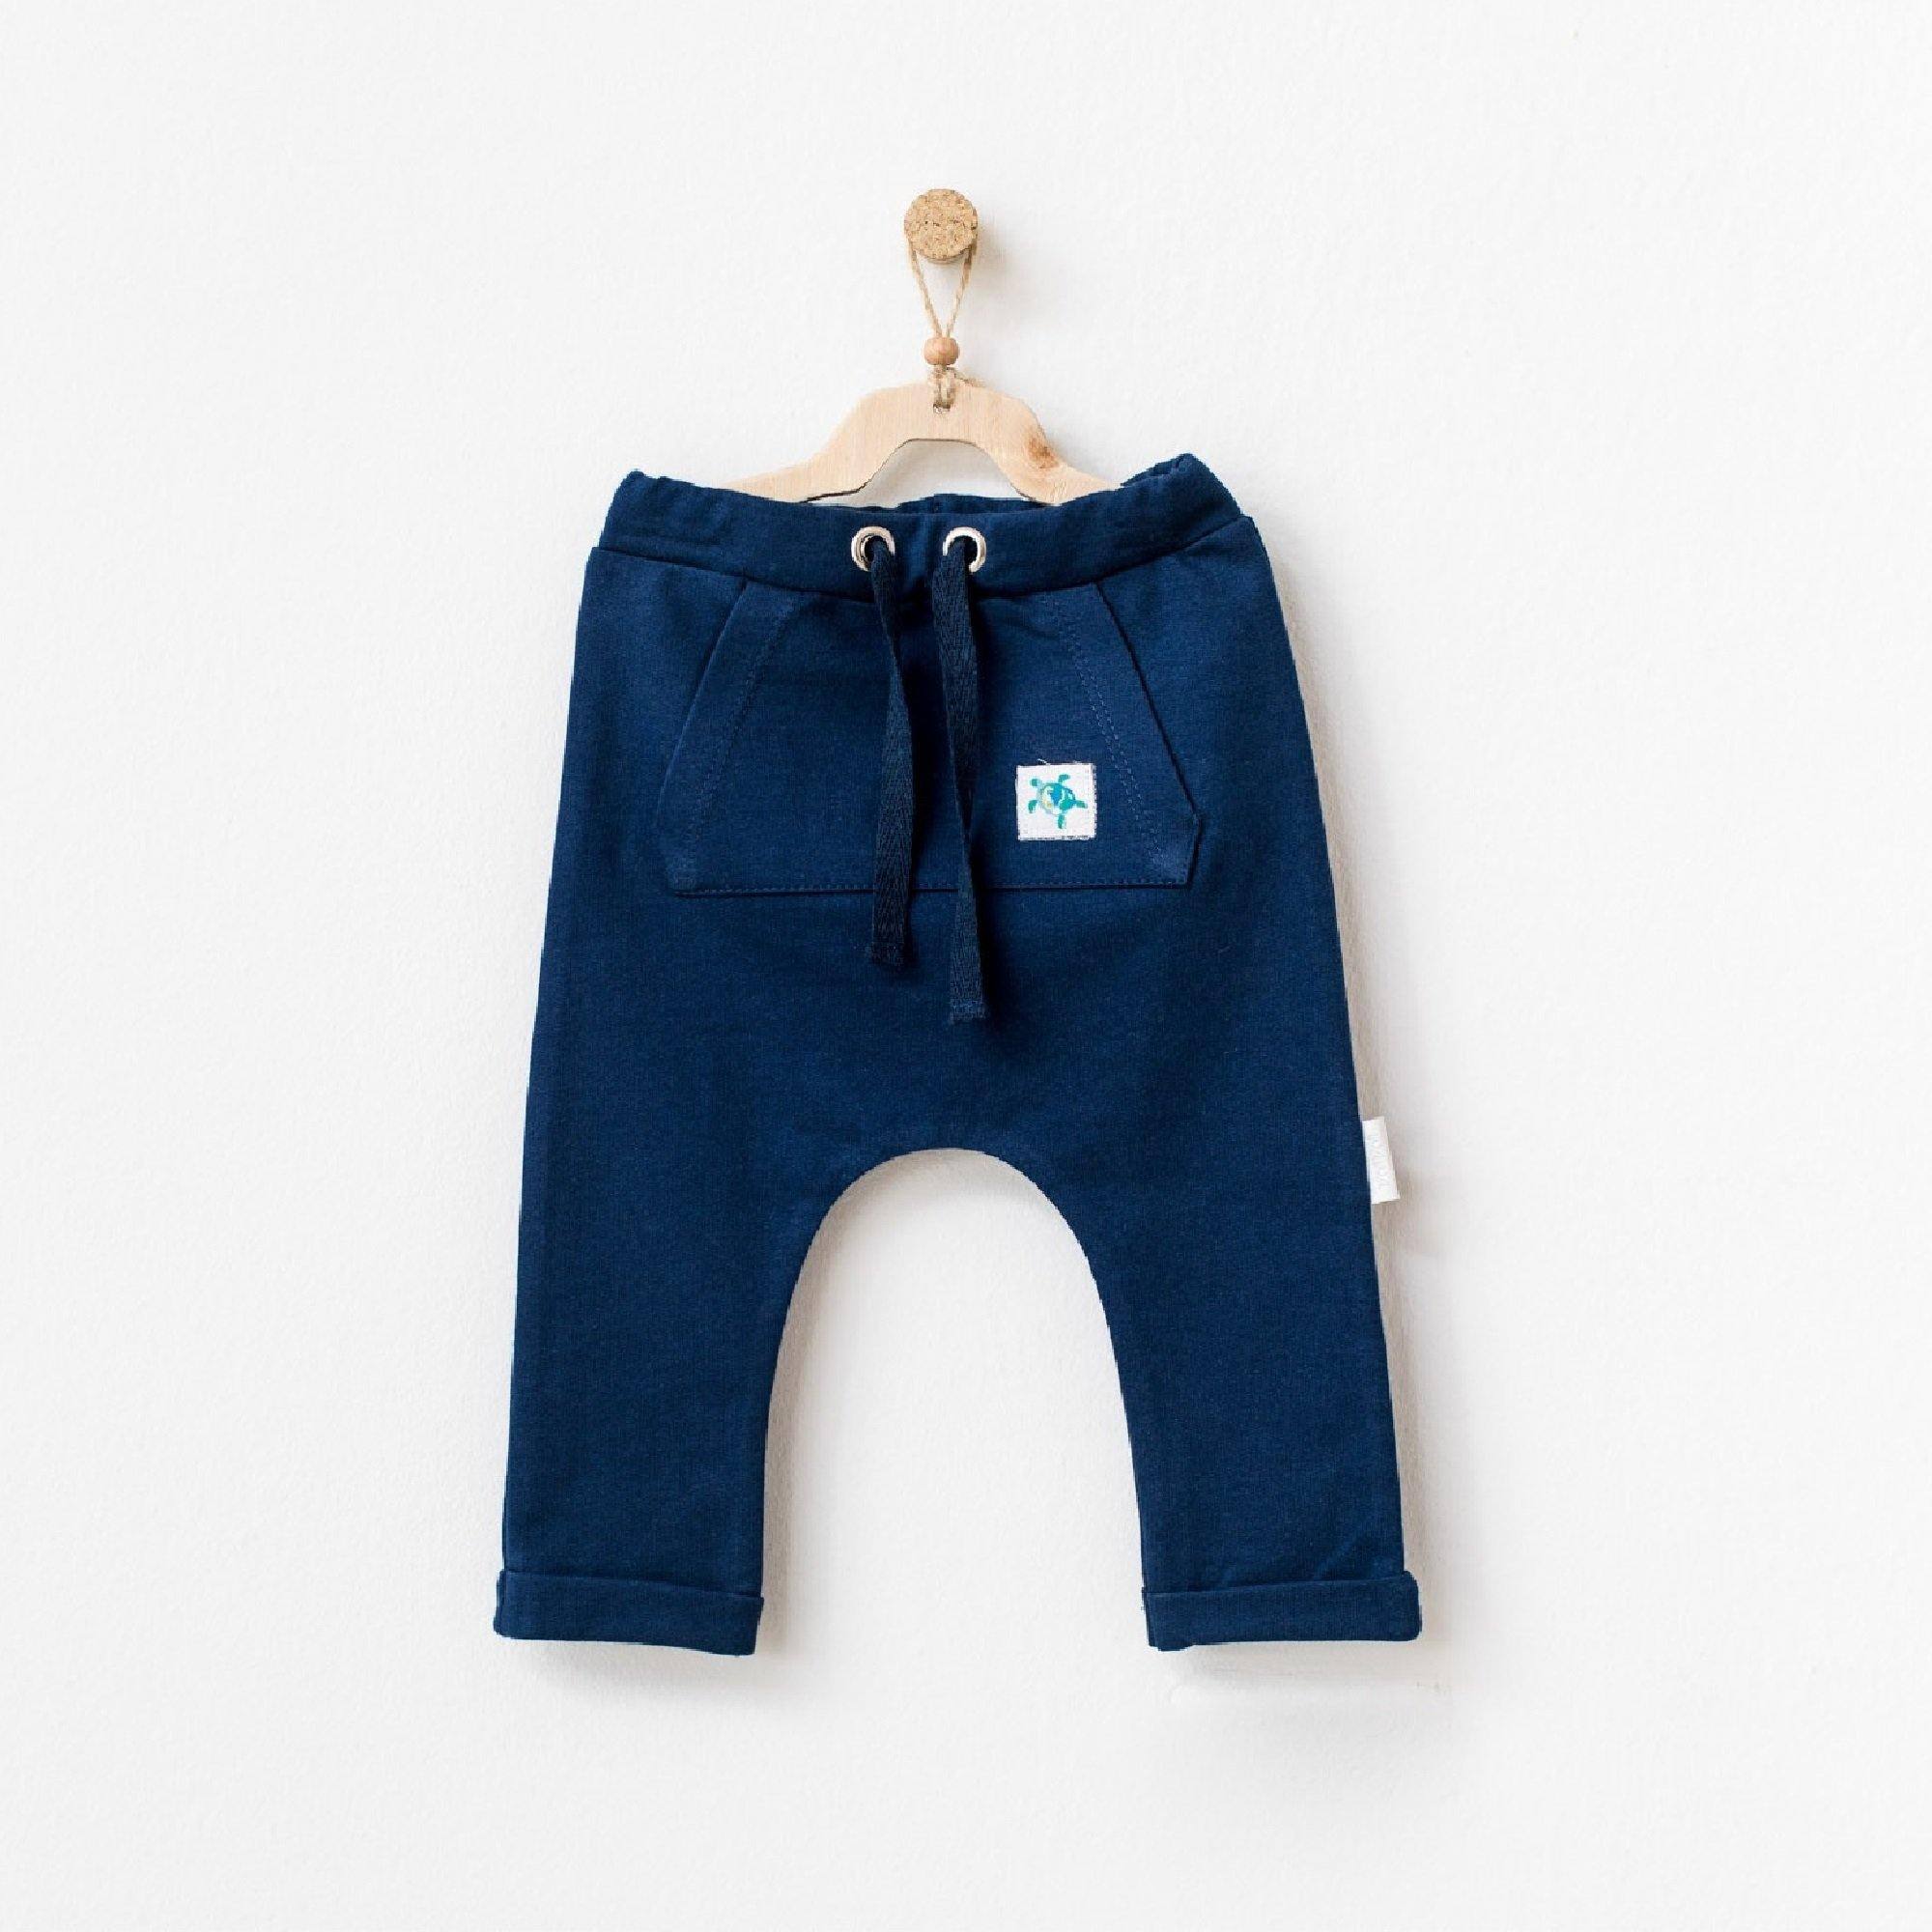 Play Time - Cotton Pant - Play Time - Cotton Pant - 1-3 Months / Navy - Andywawa - Melymod